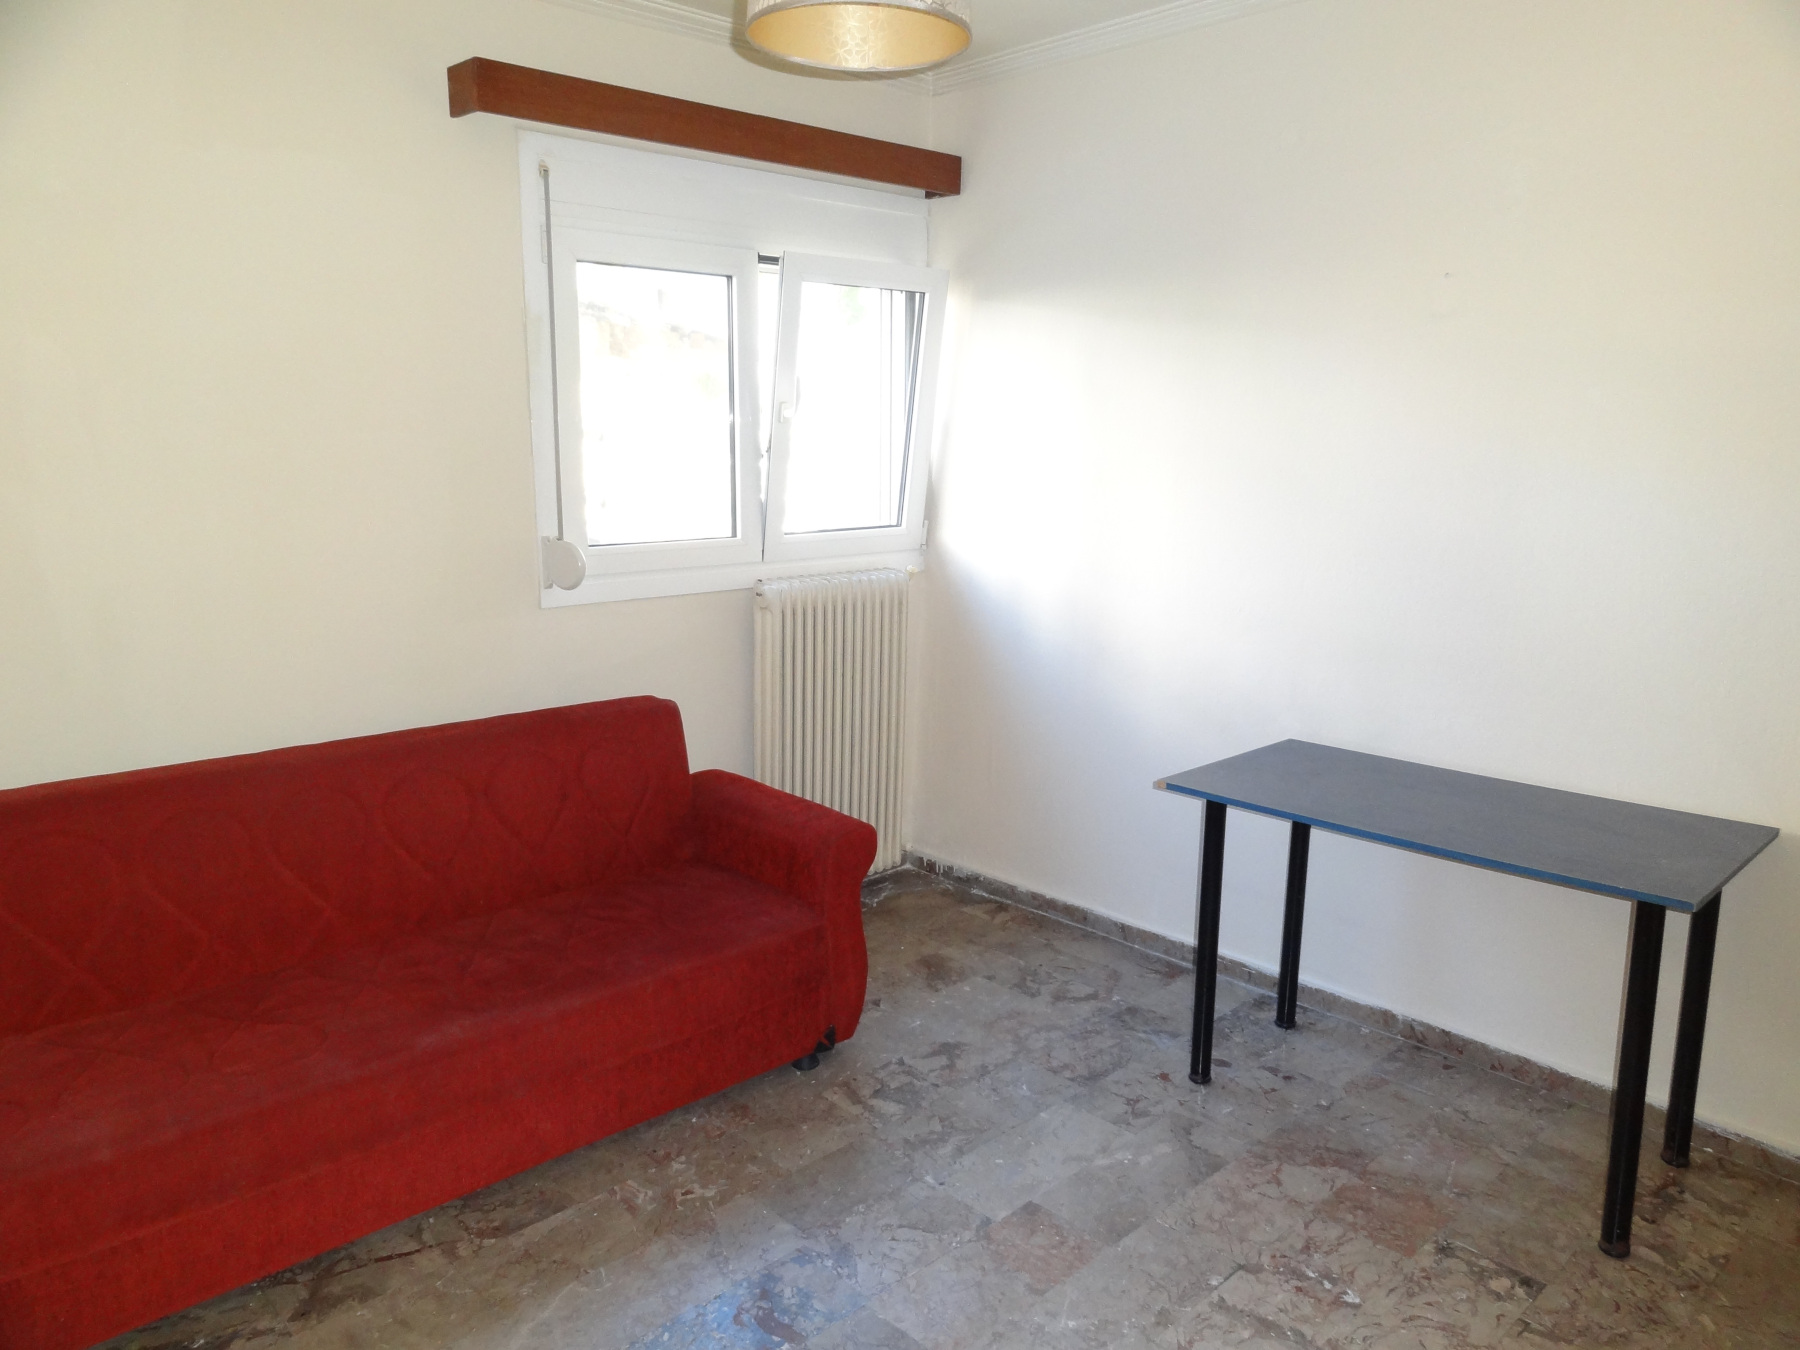 Ground floor 2 bedrooms apartment for rent, 74 sq.m. in the area of Lakkomata near the center of Ioannina